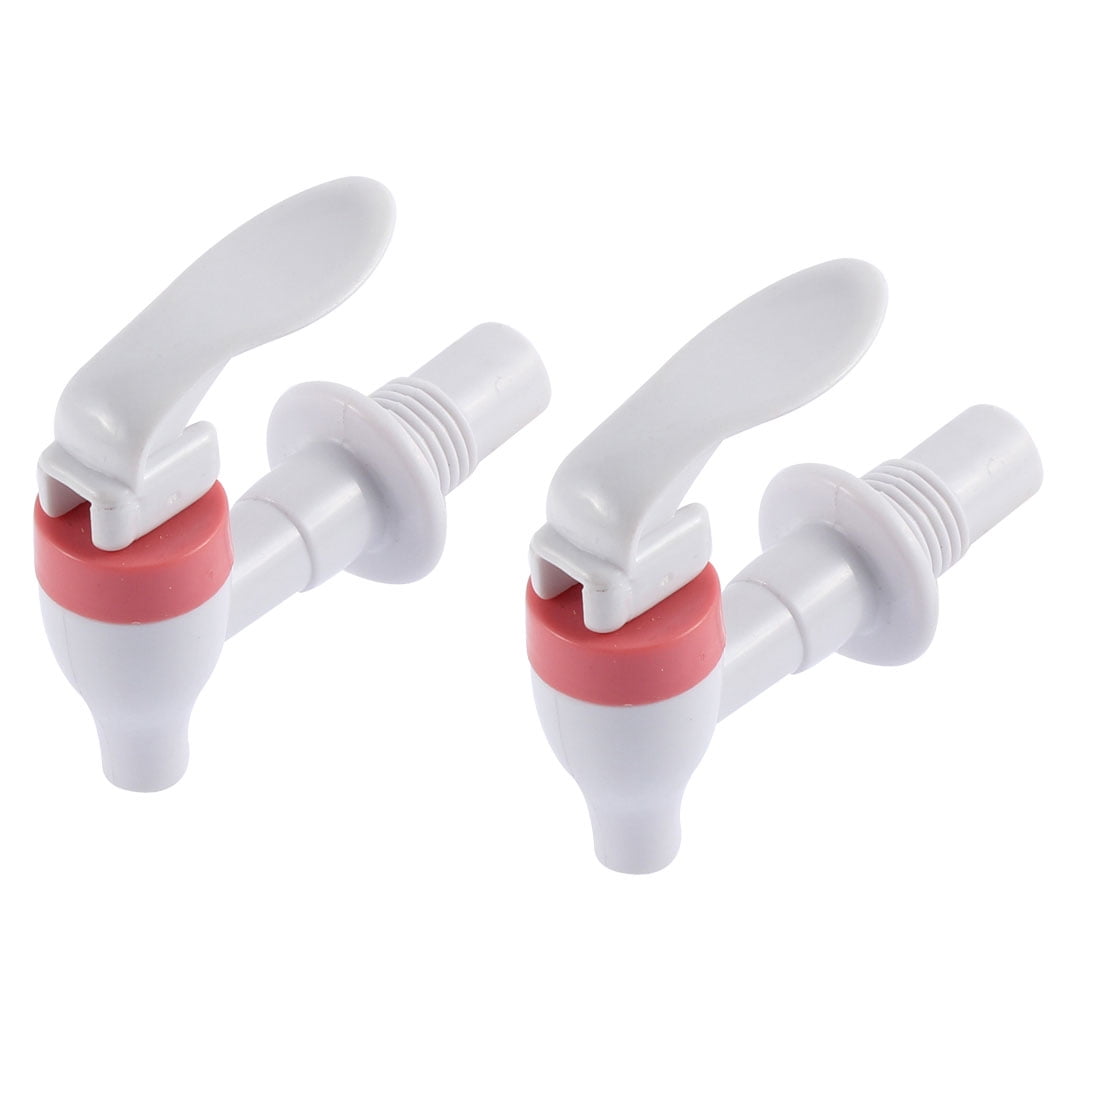 Lowest Price Washing 11mm Male Thread Sink Water Tap Faucet Off White Plastic